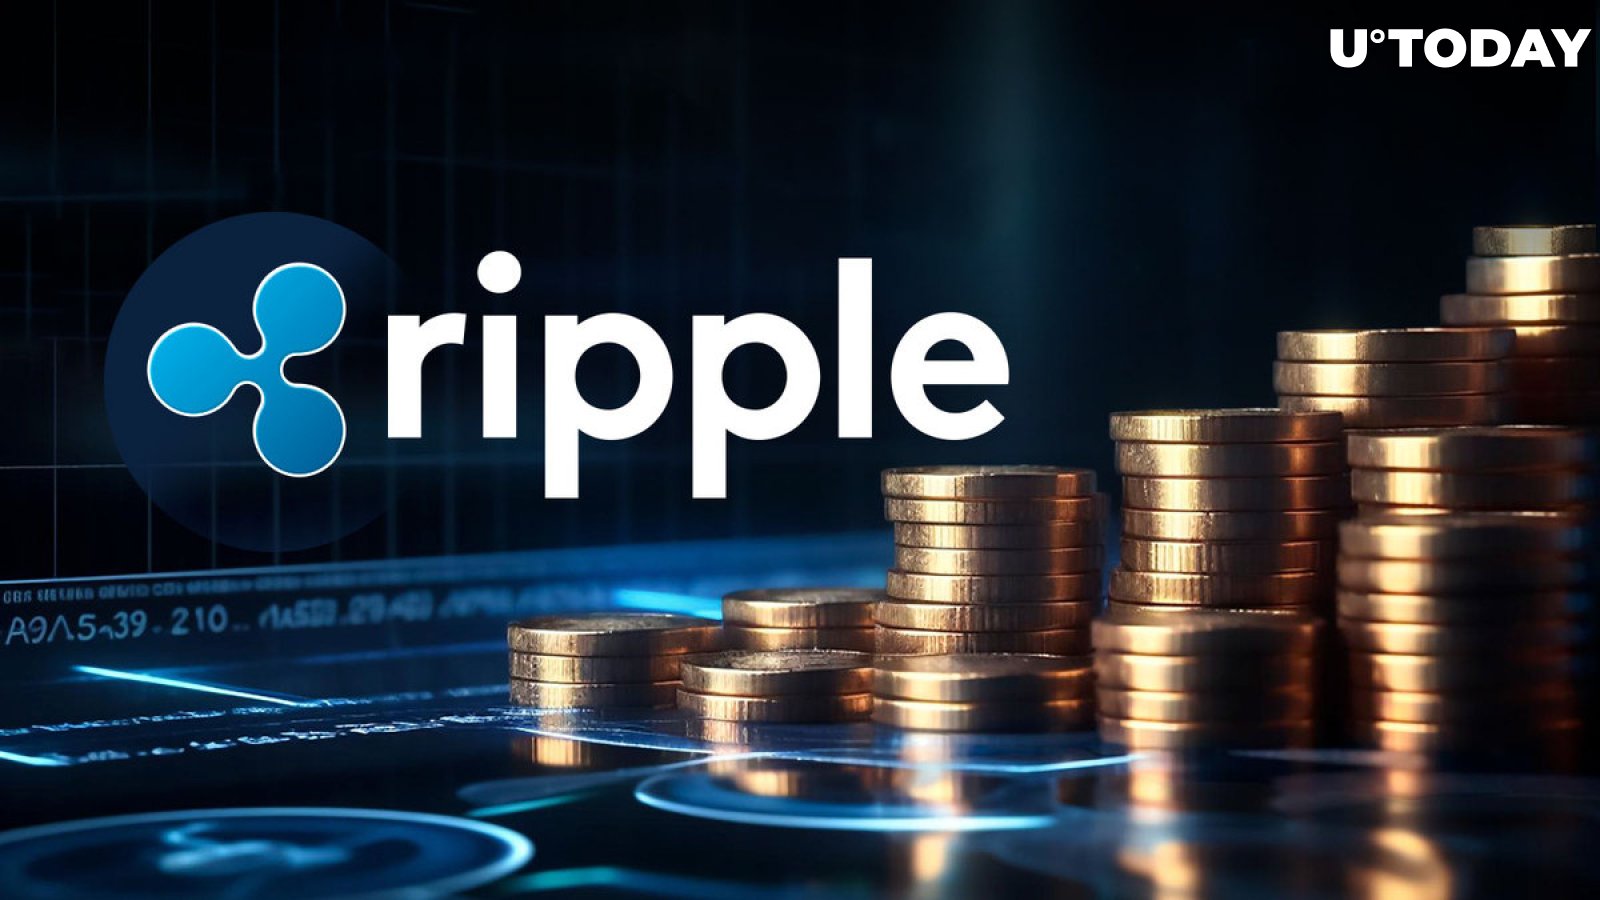 Ripple Fully Ready to Launch Stablecoin: Middle East and Africa CEO